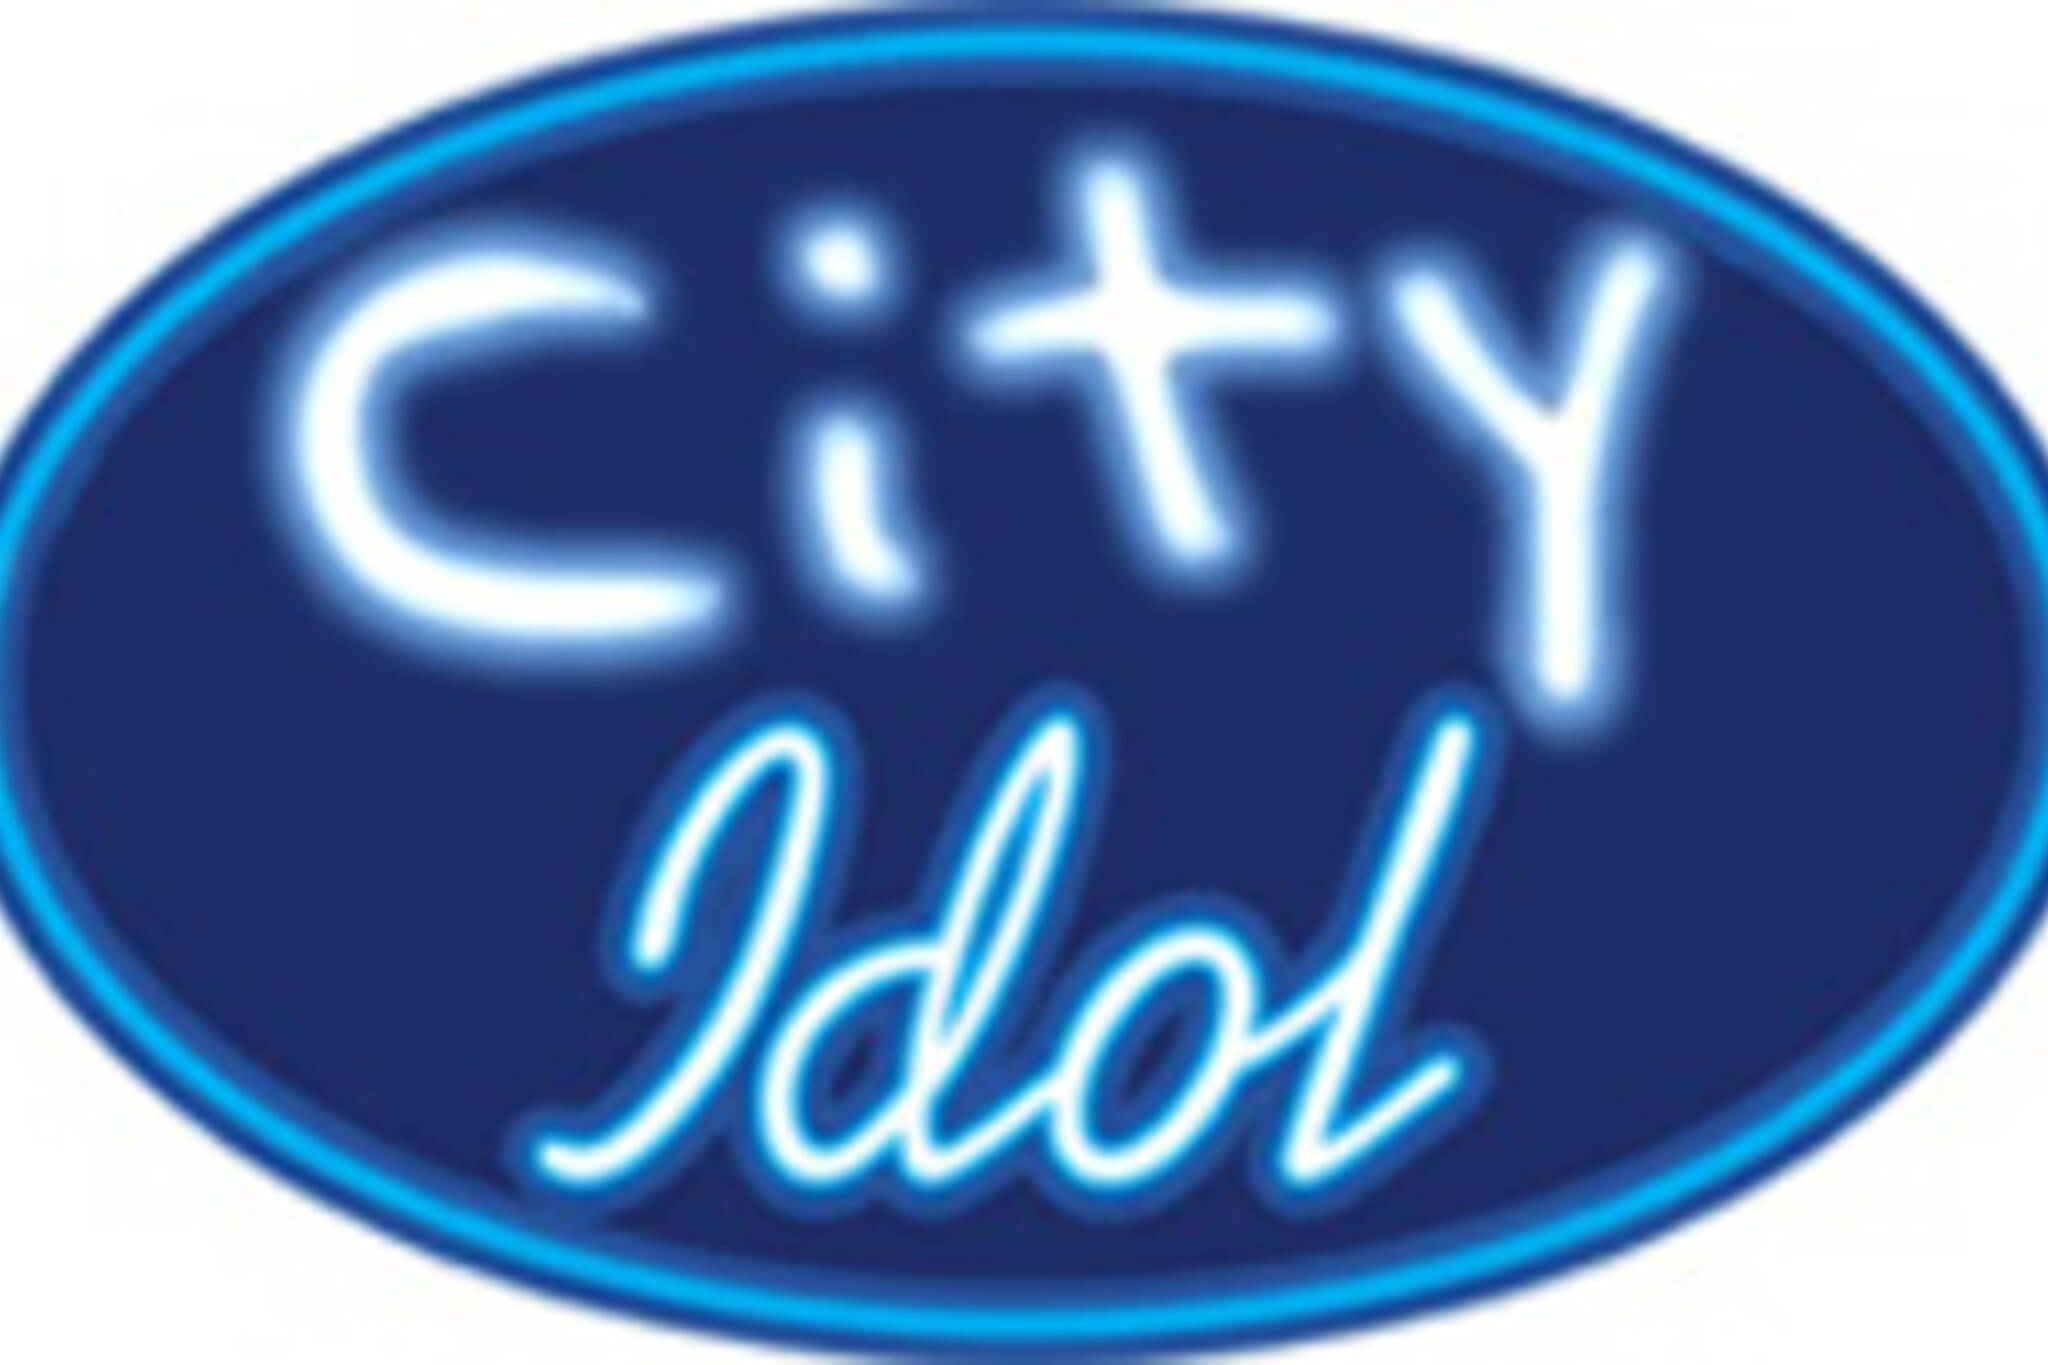 City Idol... will it take the city by storm? (image courtesy Dave Meslin/cityidol.to)